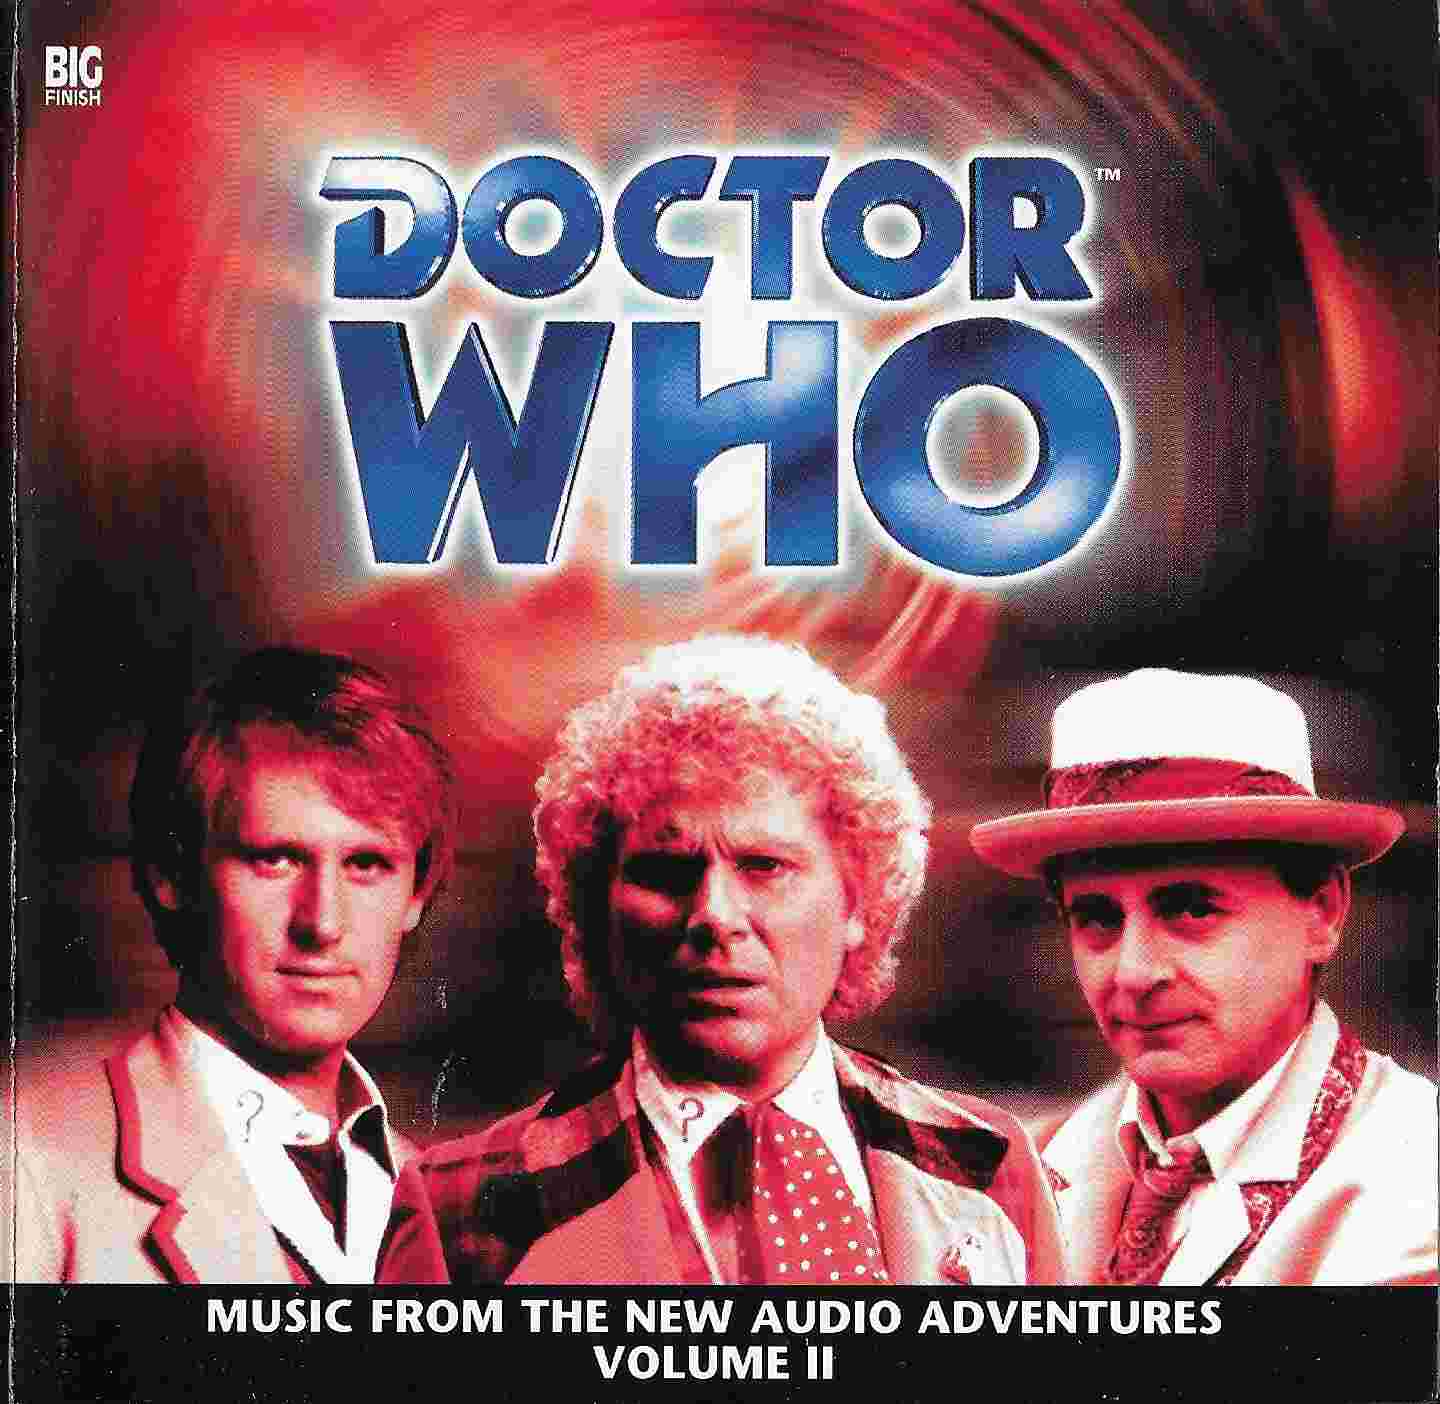 Picture of BFPCDMUSIC 2 Doctor Who - Music from the new adventures - Volume 2 by artist Various from the BBC records and Tapes library